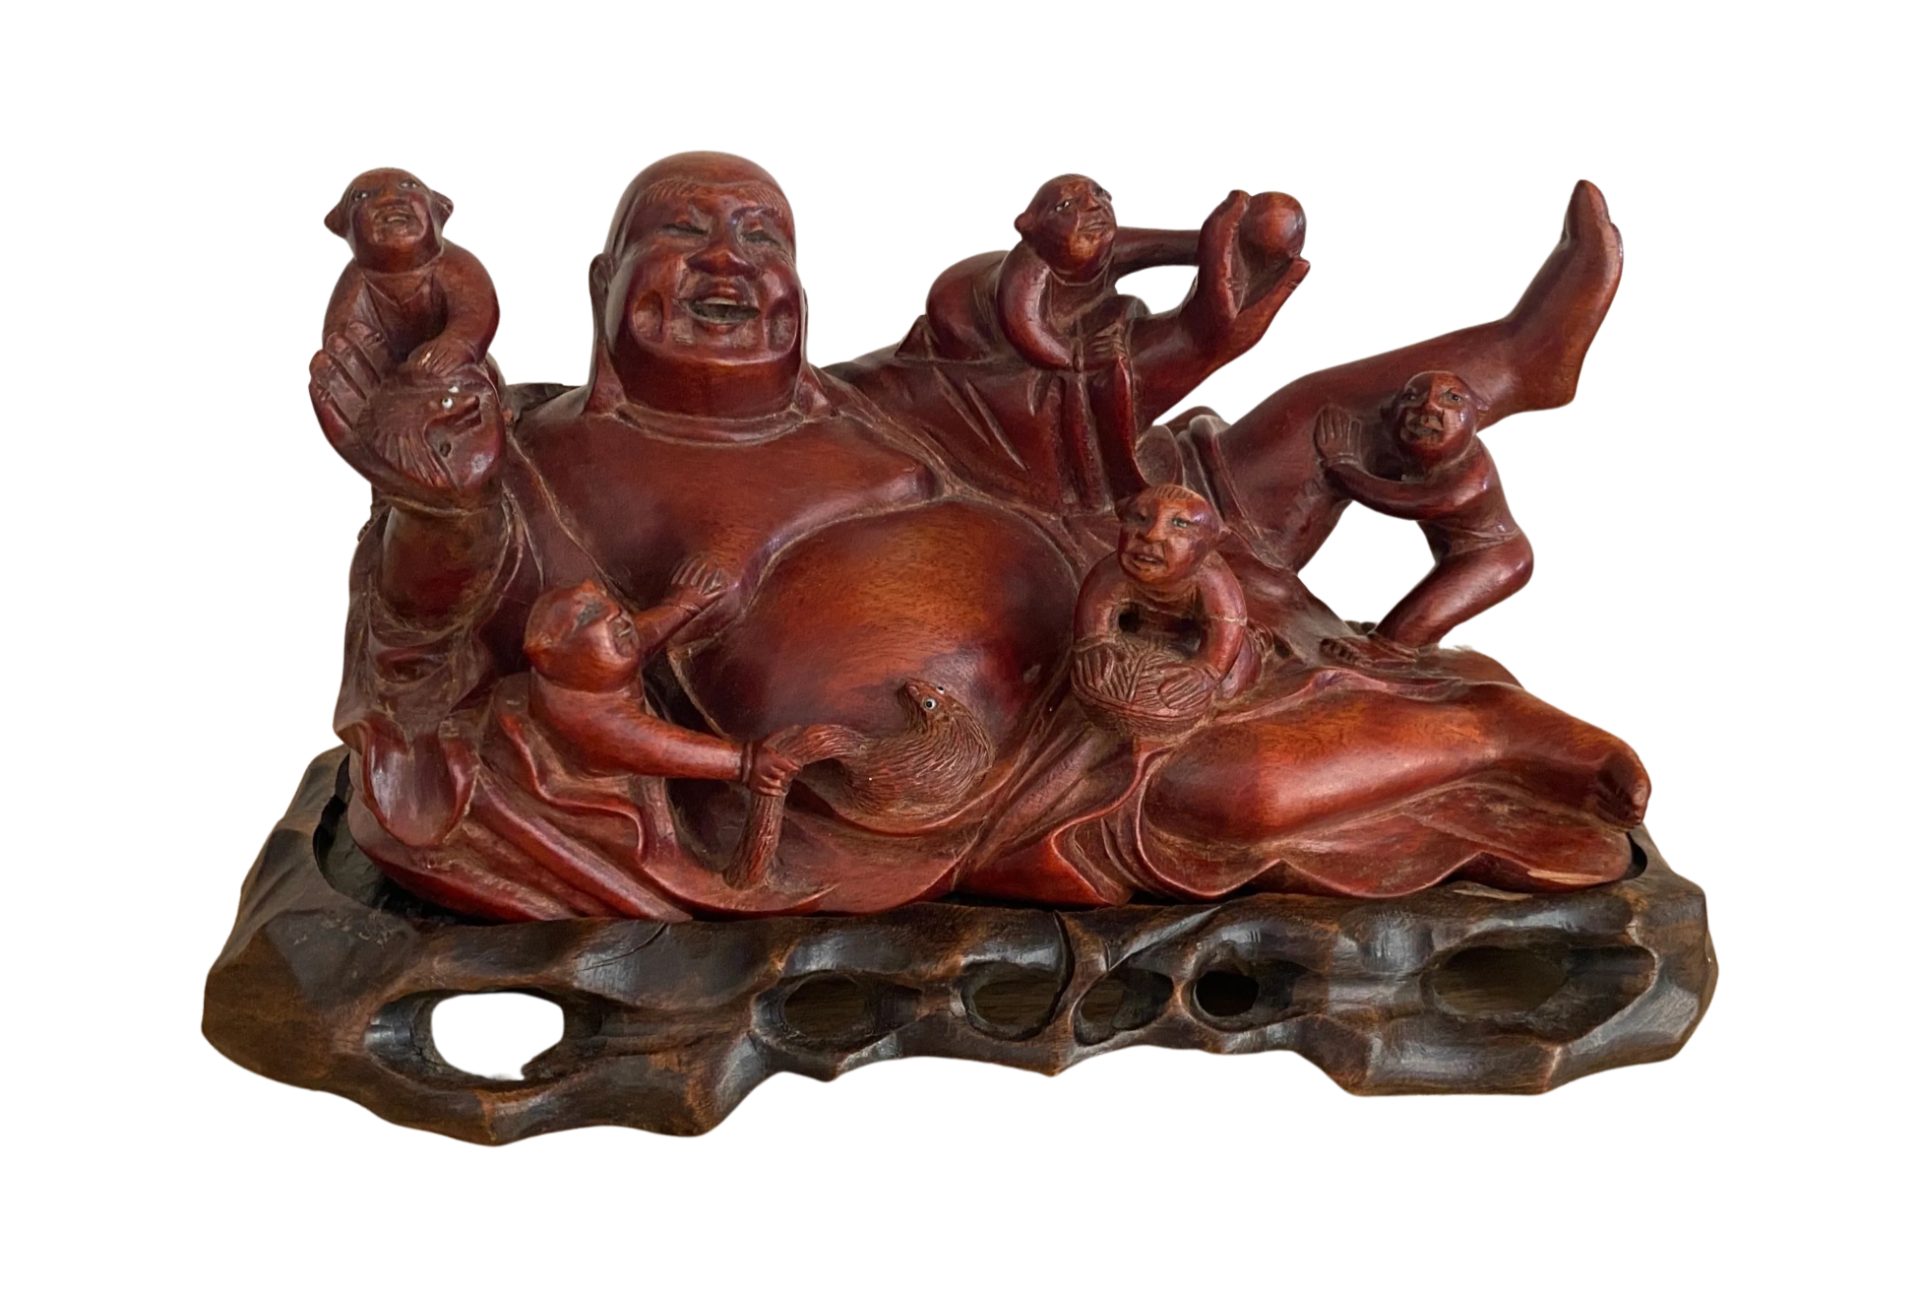 AN ANTIQUE CHINESE QING CARVED ROOTWOOD FIGURE OF A BUDDHA FIGURE WITH CHILDREN WITH BONE EYES, 22 X